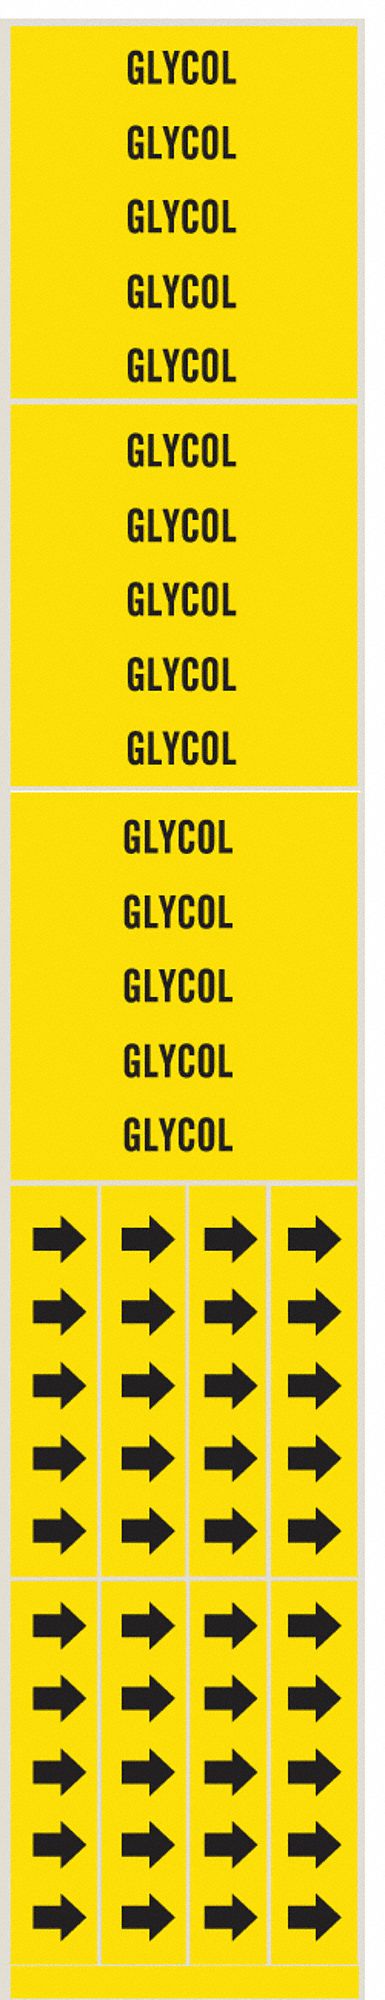 Pipe Marker,Glycol,Yellow,3/4 In or Less